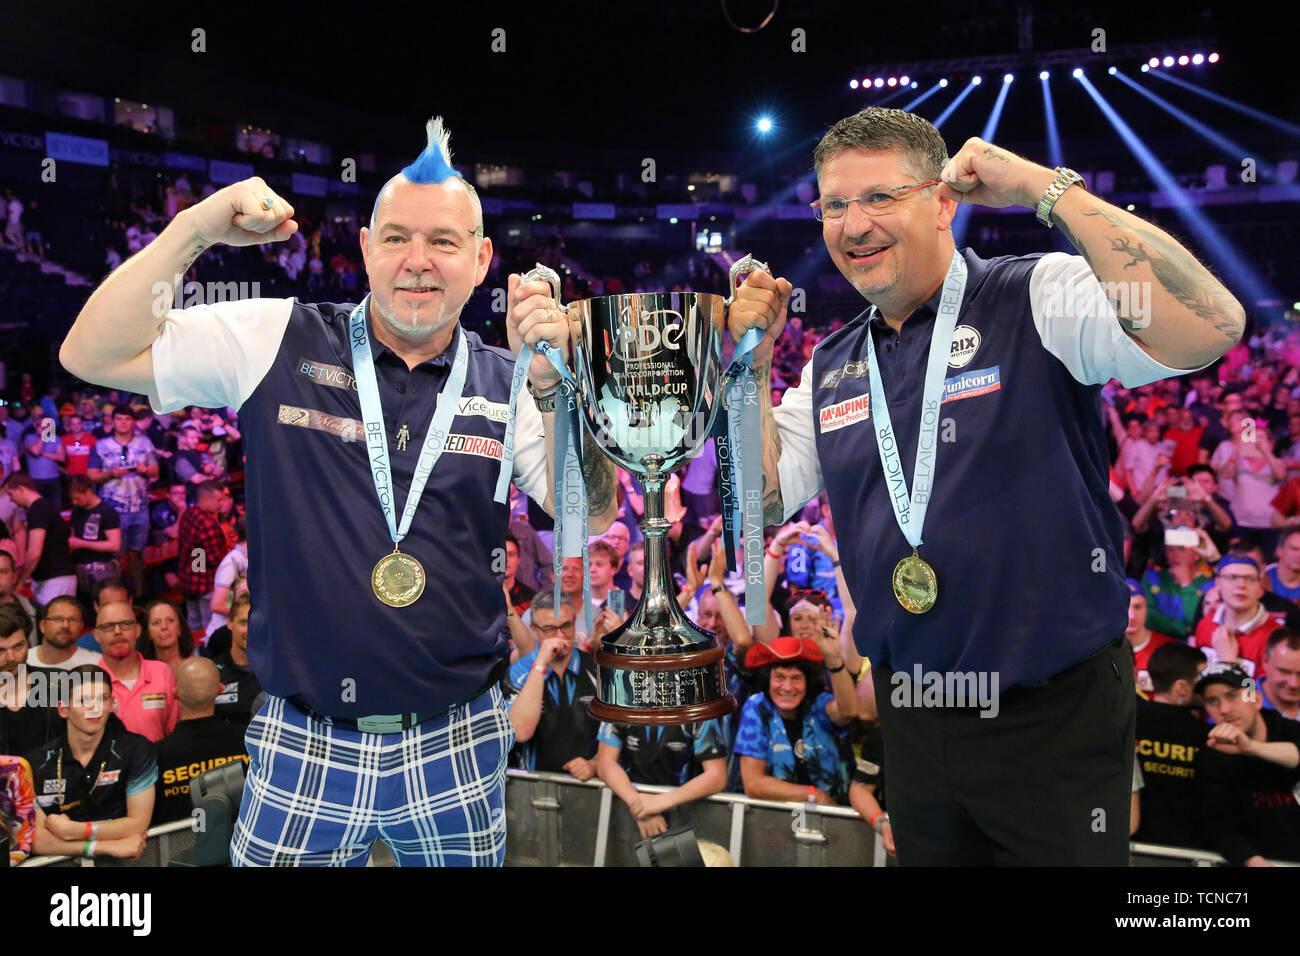 Hamburg, Germany. 09th June, 2019. Darts: Team World Championship, Final:  Scotland - Ireland. The winning team Peter Wright (l) and Gary Anderson  from Scotland pose with their trophy after the victory. Credit: